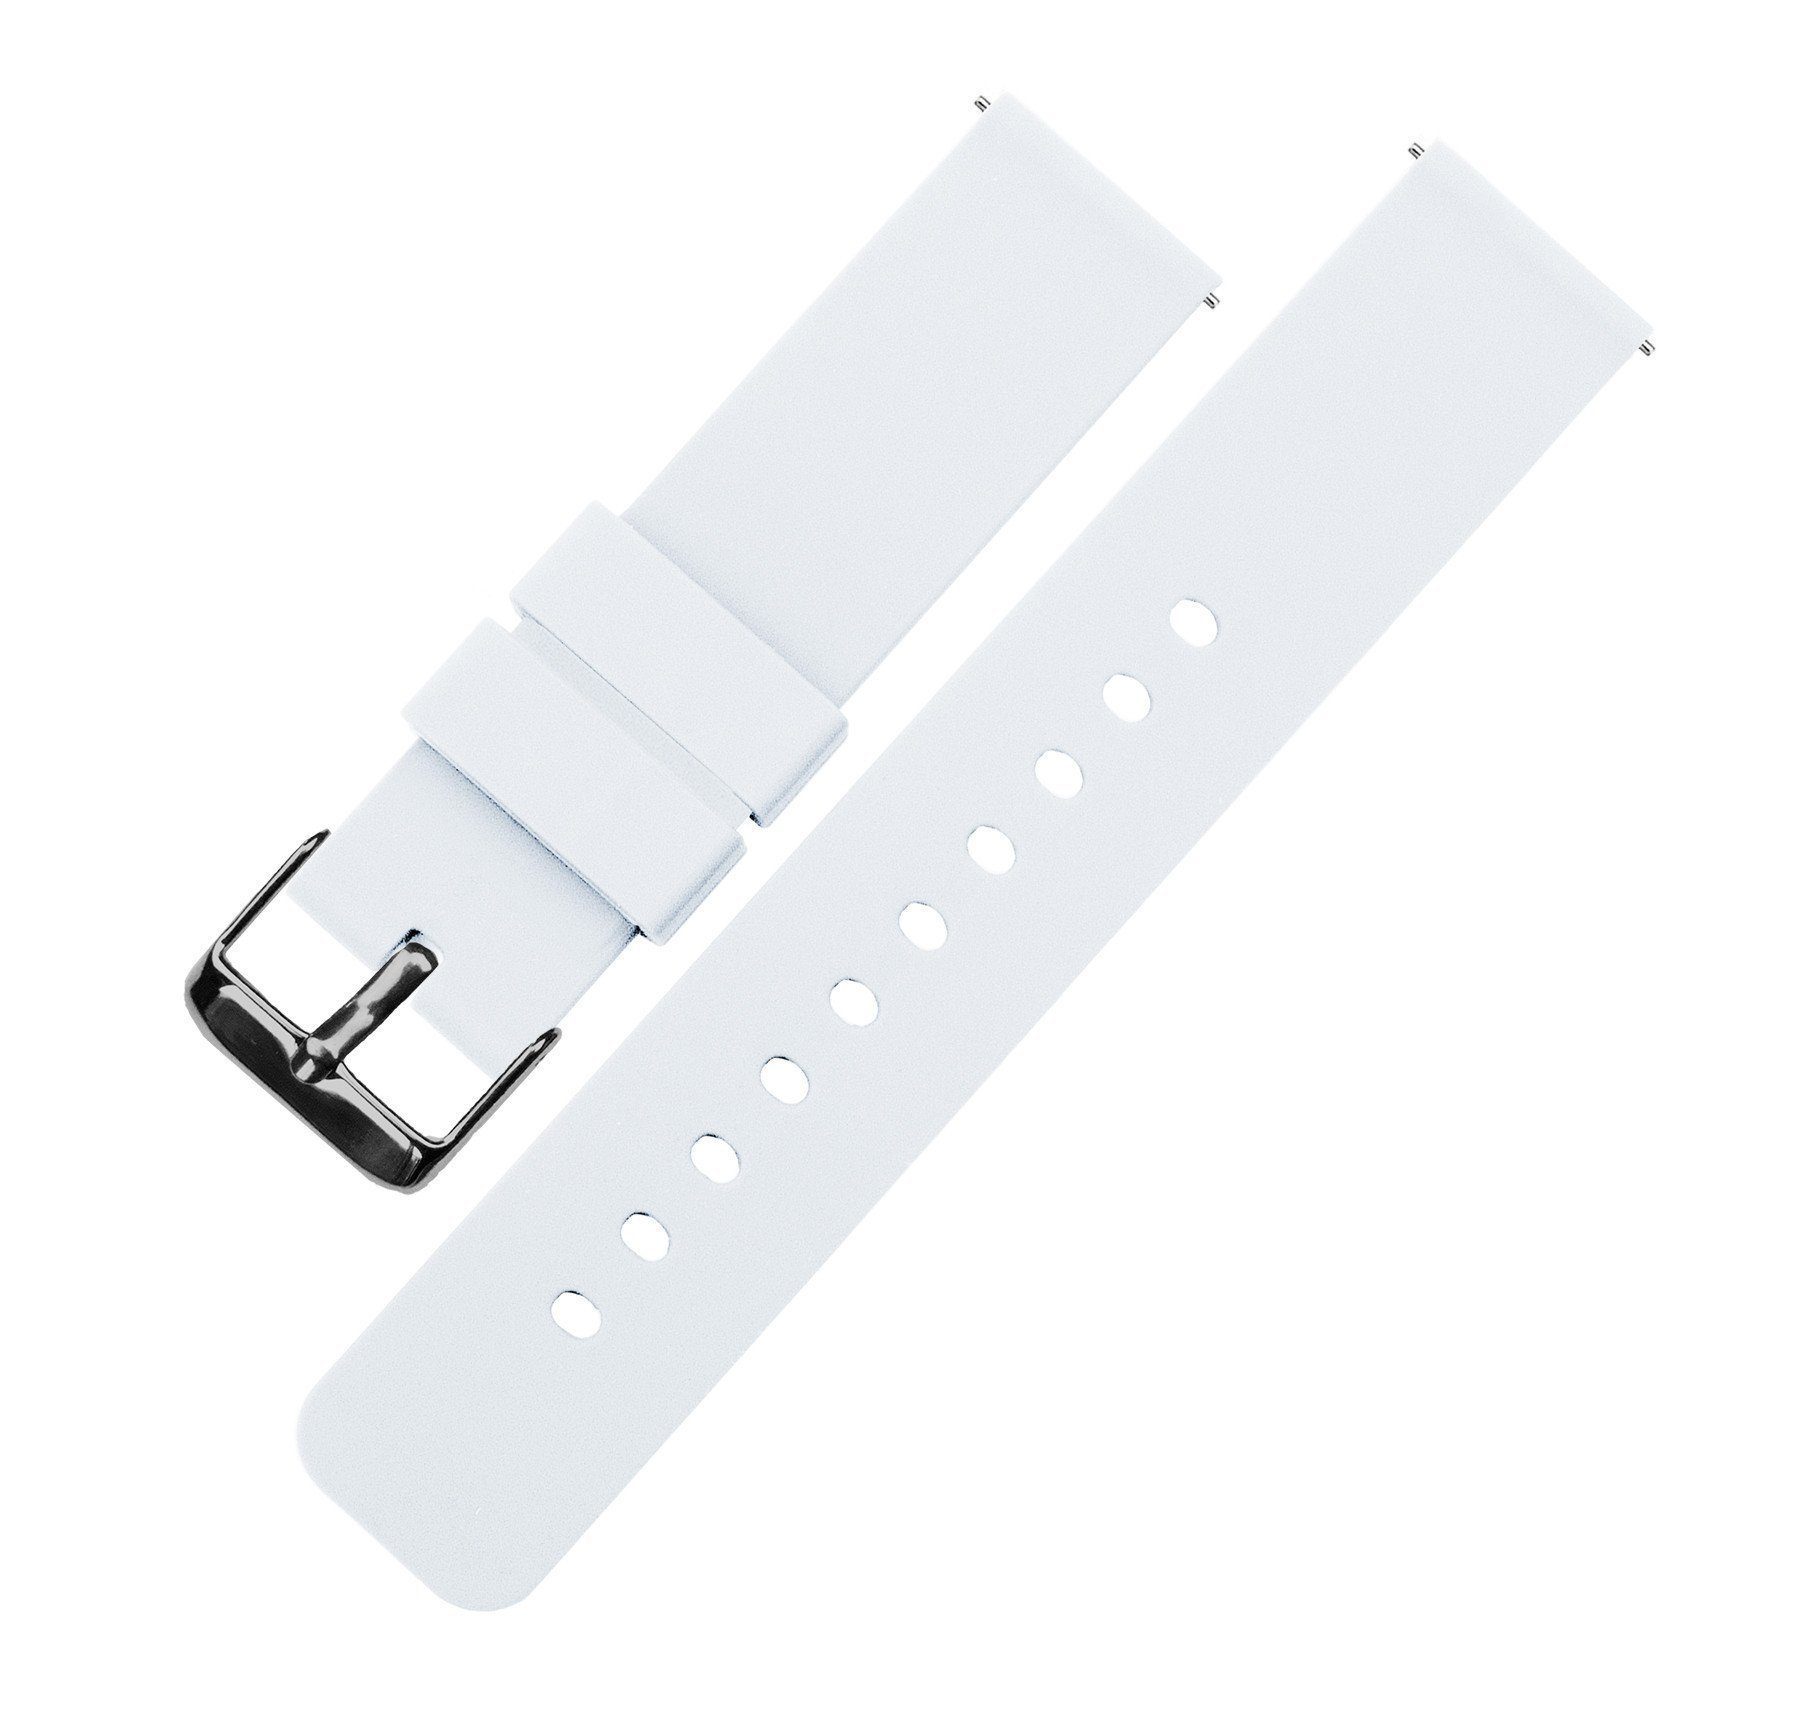 21mm White - Barton Canvas Quick Release Watch Band Straps - Choose Color & Width - 18mm, 19mm, 20mm, 21mm, 22mm, or 23mm